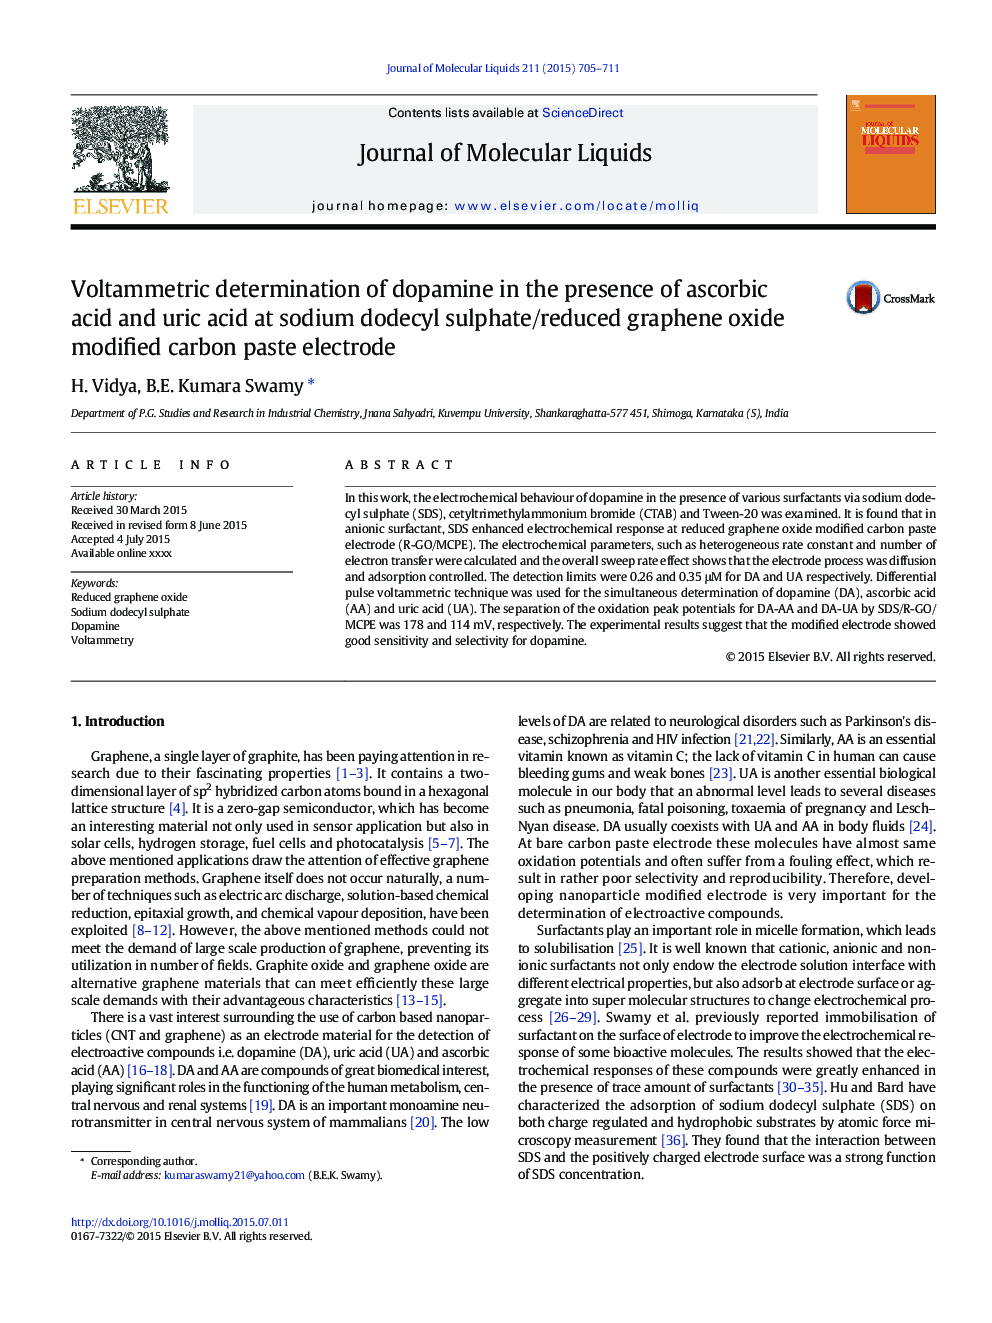 Voltammetric determination of dopamine in the presence of ascorbic acid and uric acid at sodium dodecyl sulphate/reduced graphene oxide modified carbon paste electrode